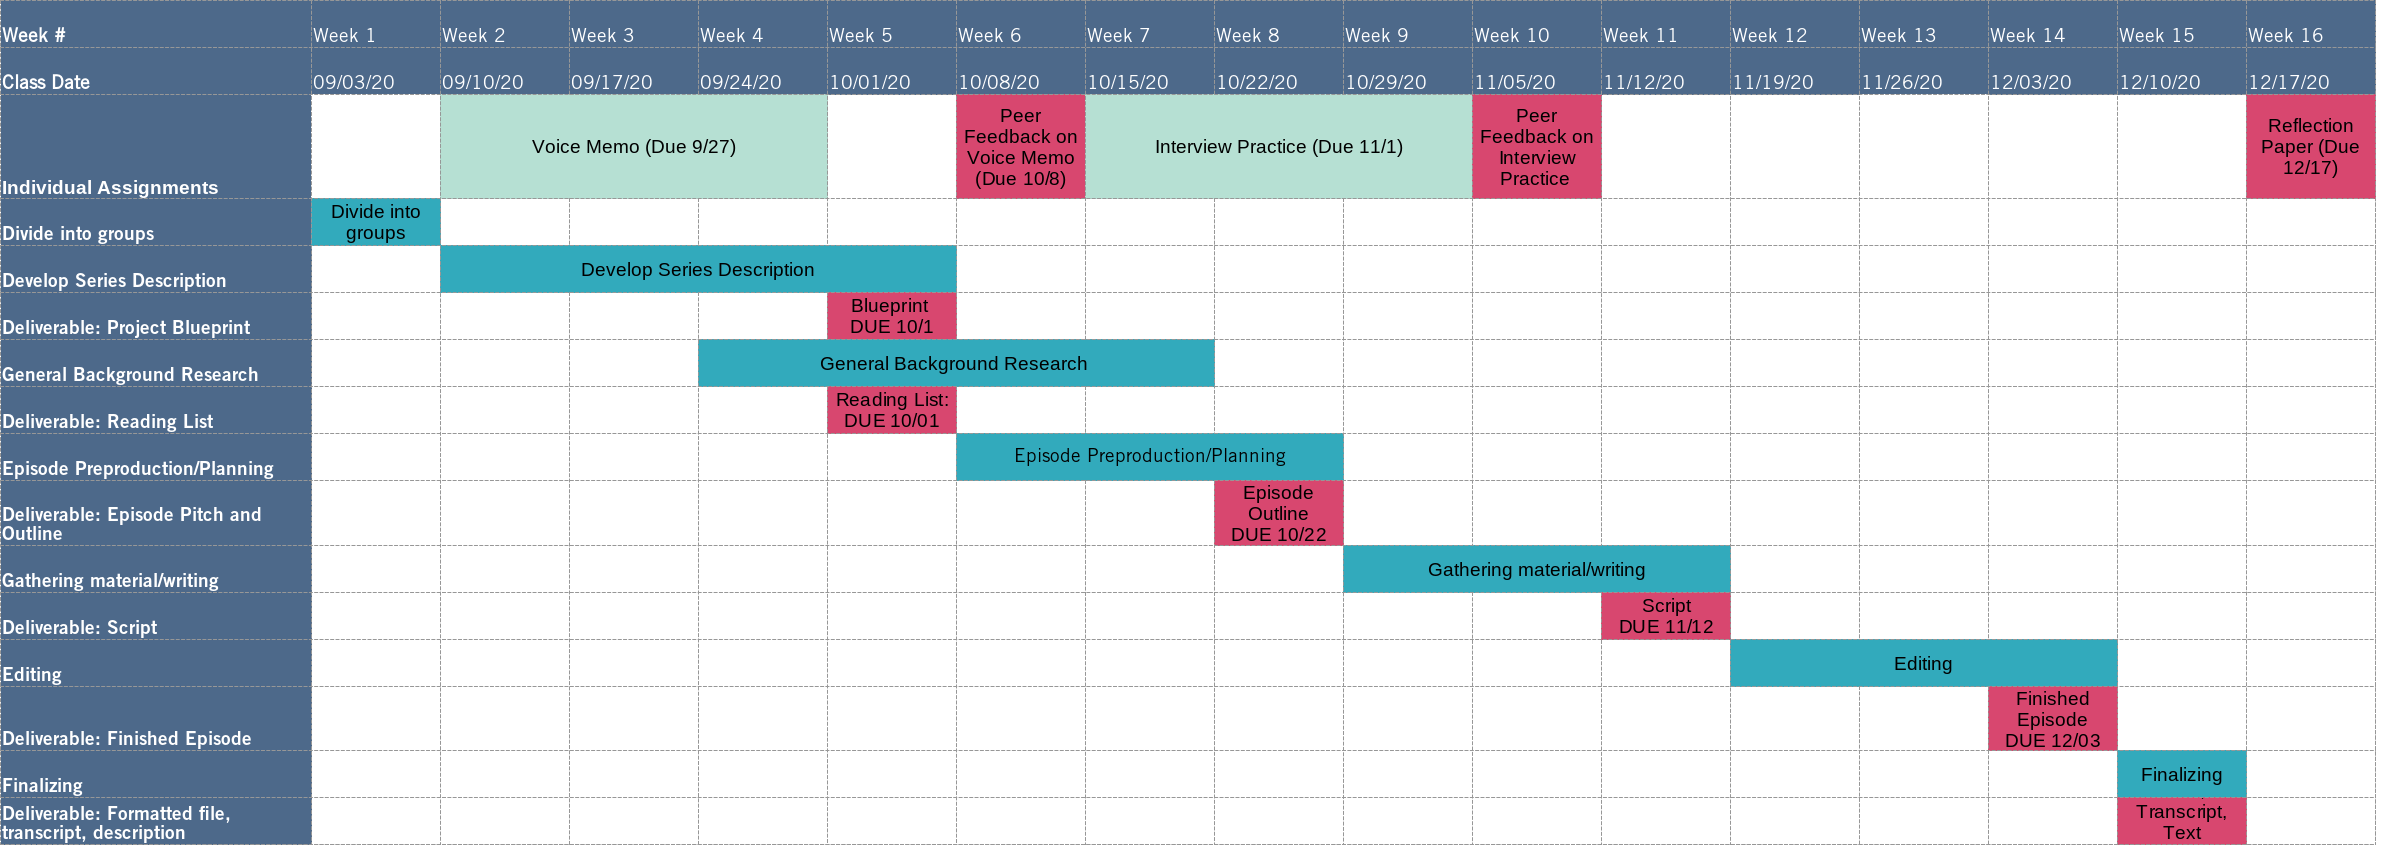 project-schedule.10-08.png